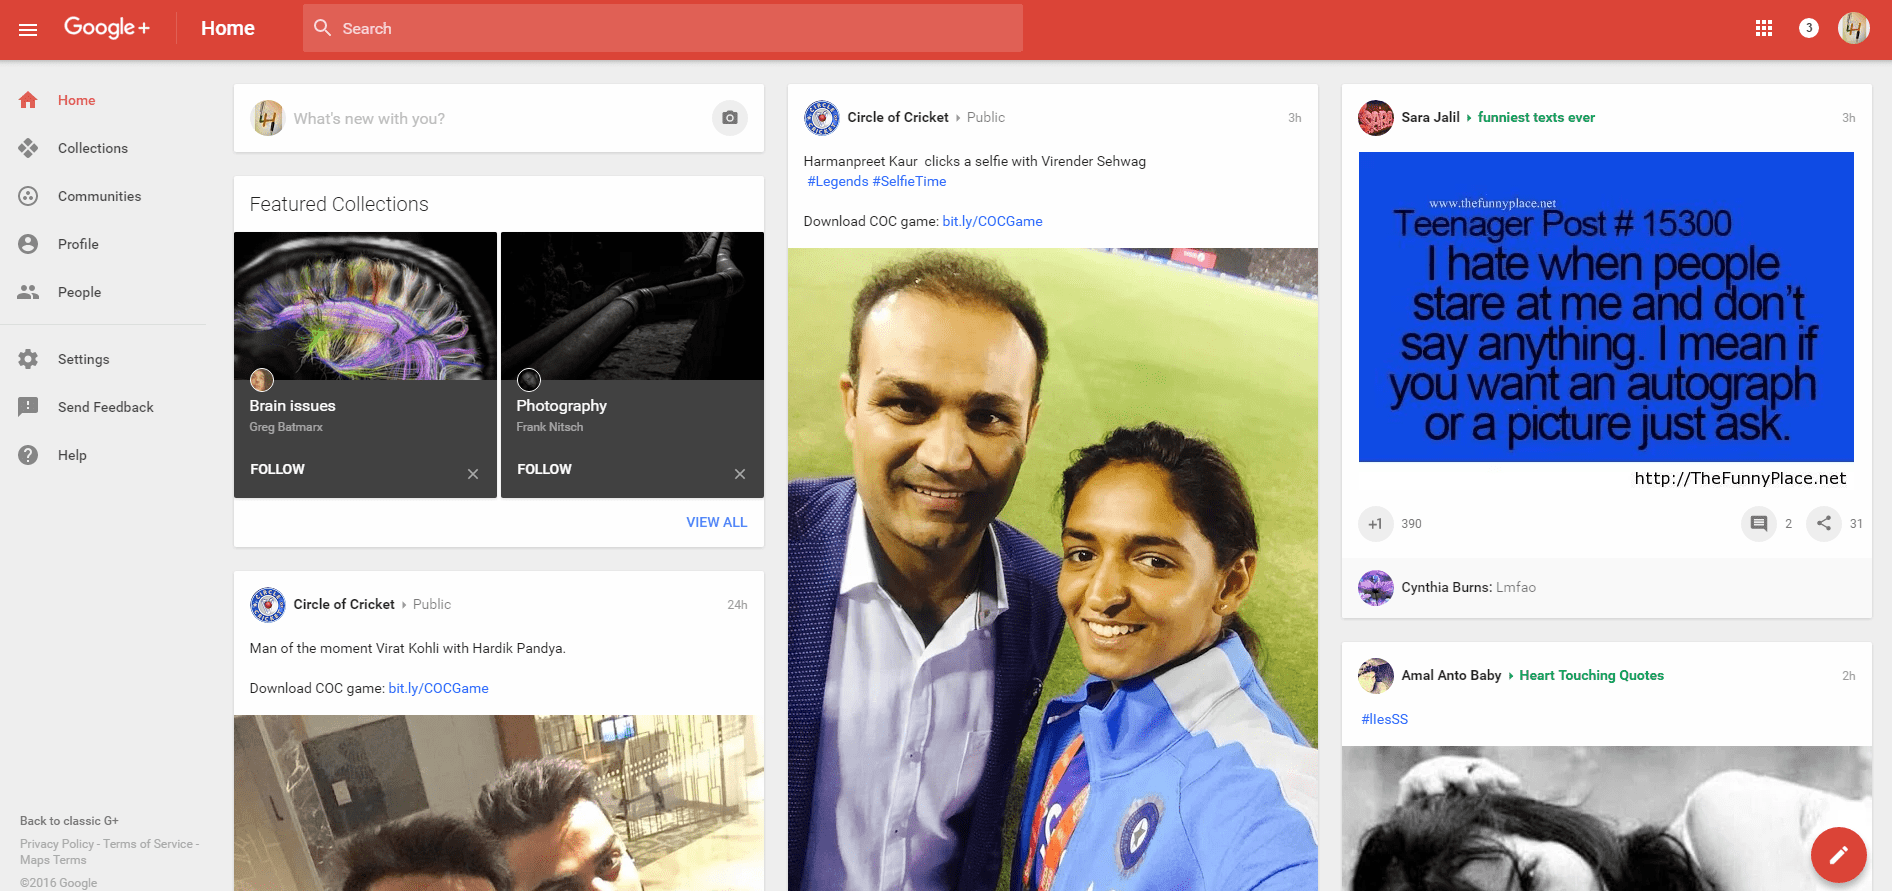 Google+ home page